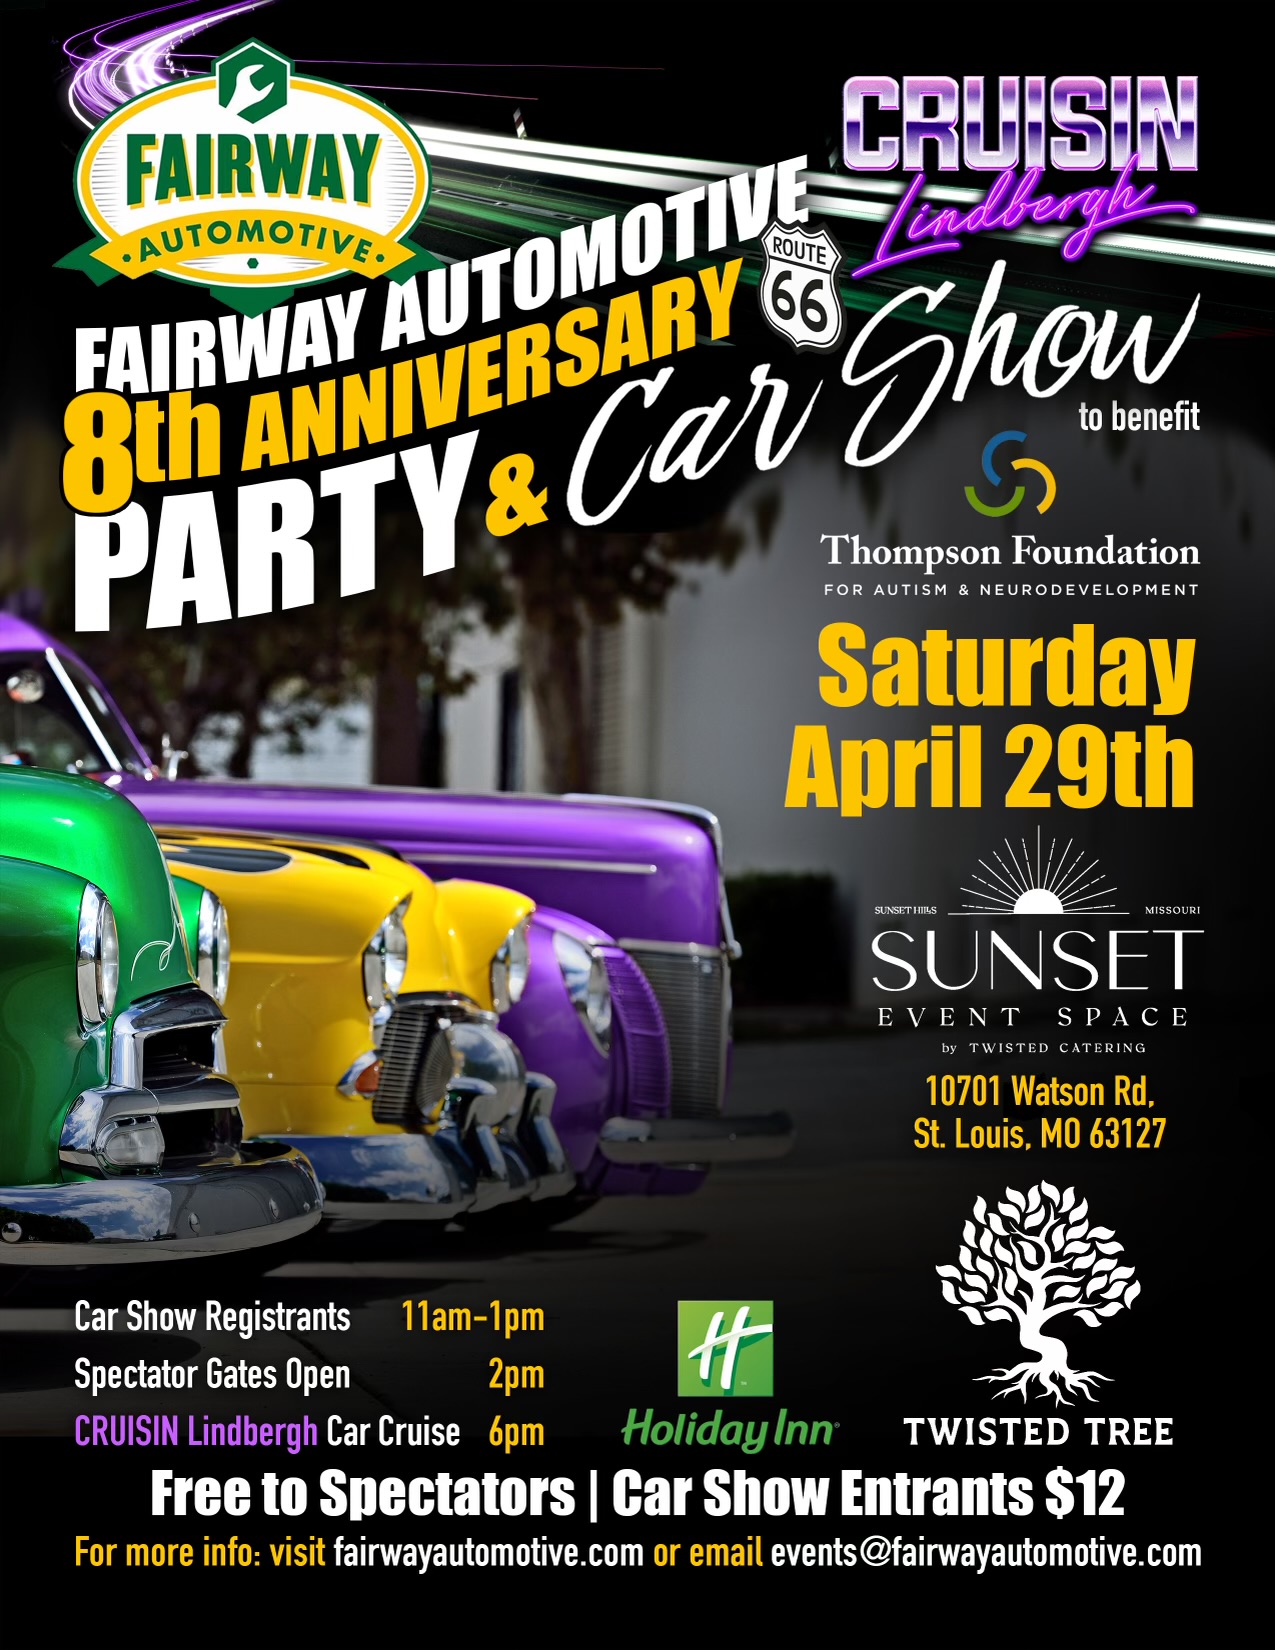 St. Louis car show to benefit the Thompson Foundation - Thompson Foundation  for Autism & Neurodevelopment